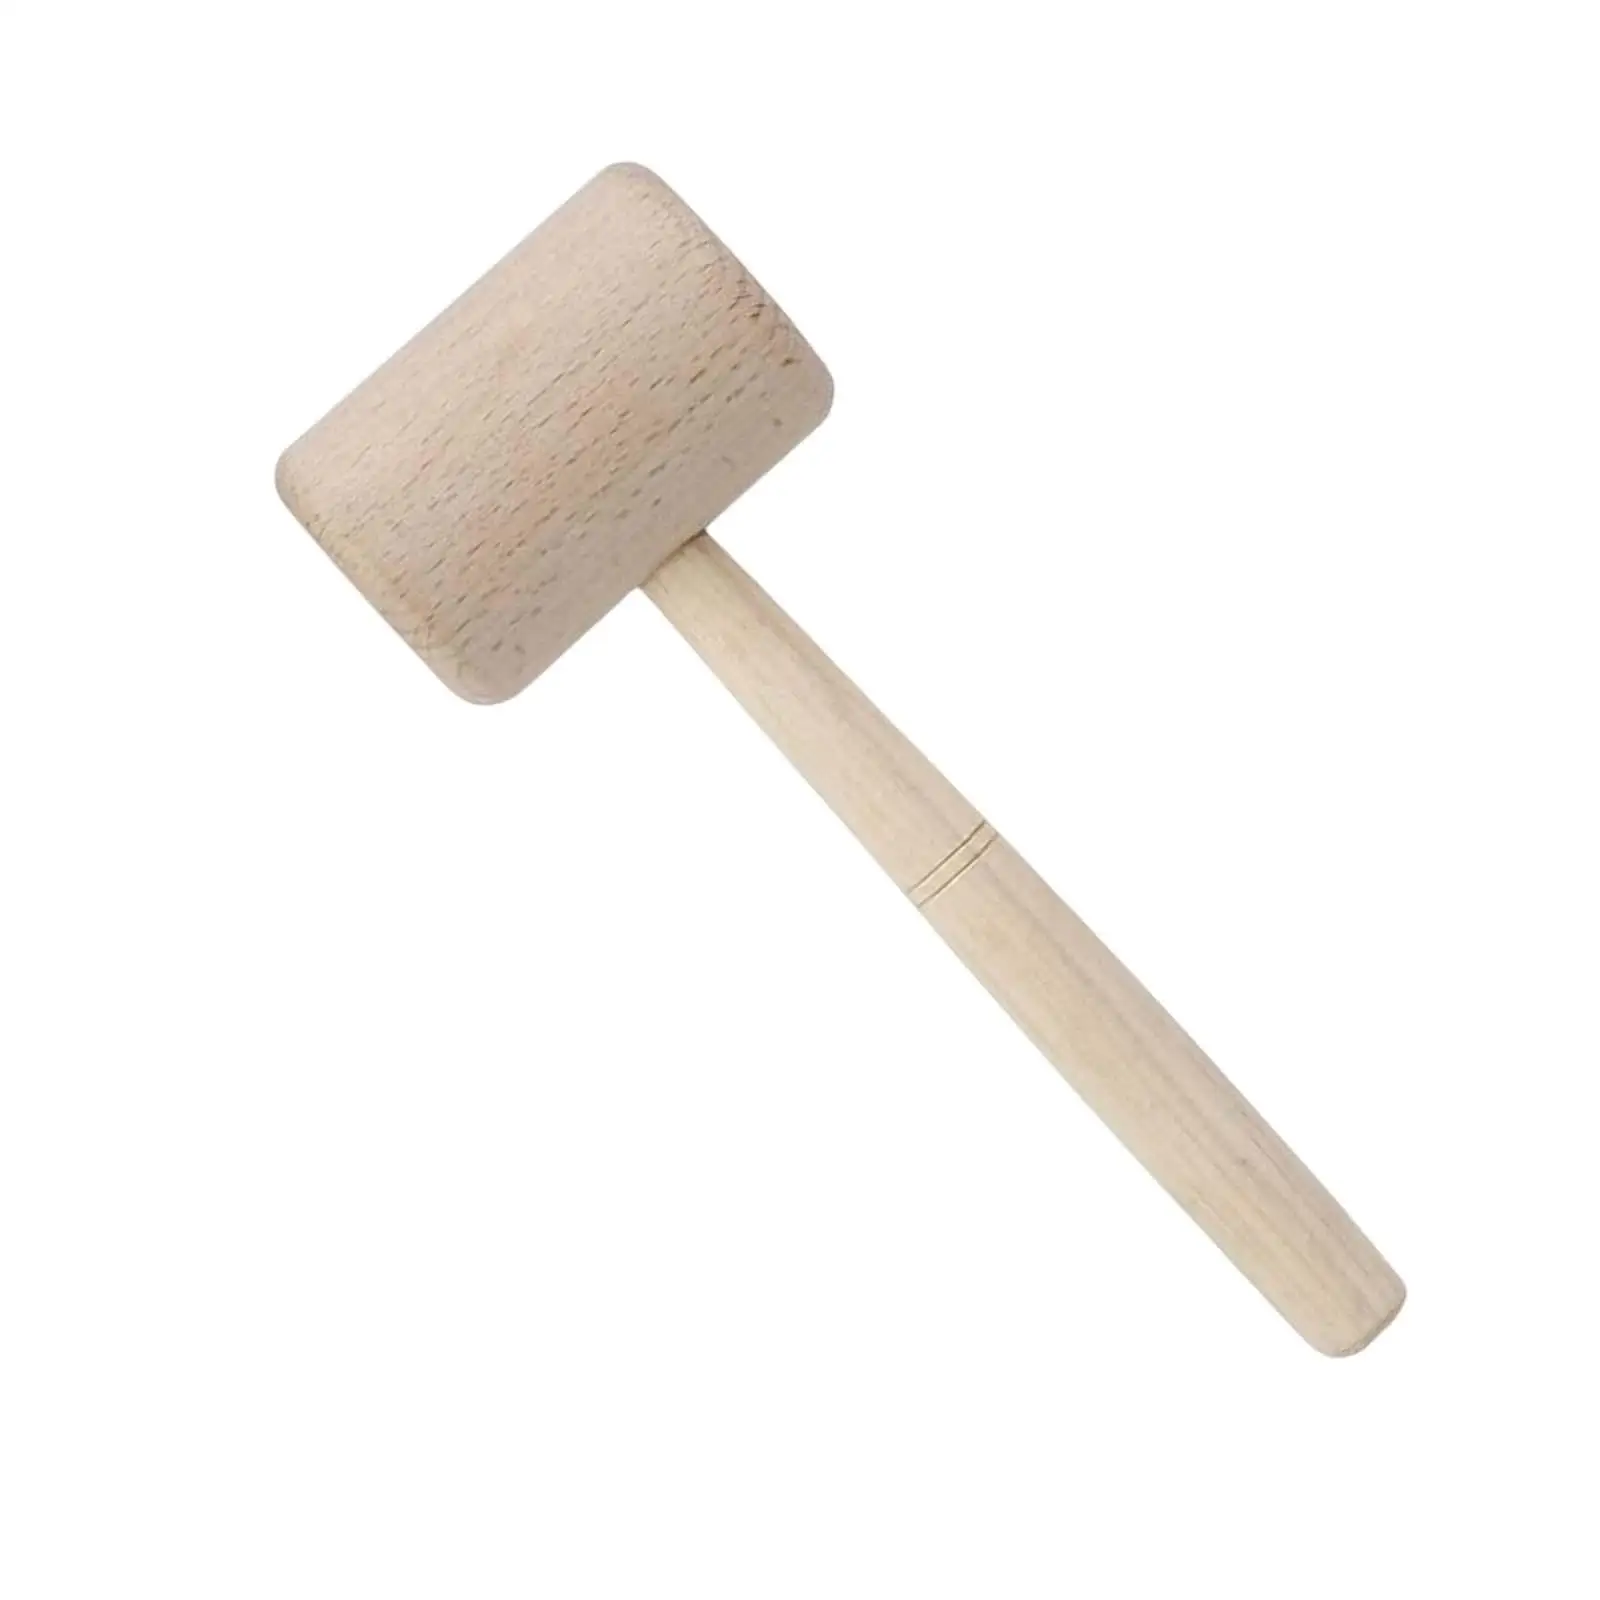 225mm Beech Solid Wood Mallet Shock Resistance Vintage Wooden Mallet Wooden Mallet Woodworking Hammer Wooden Hammer for Leather